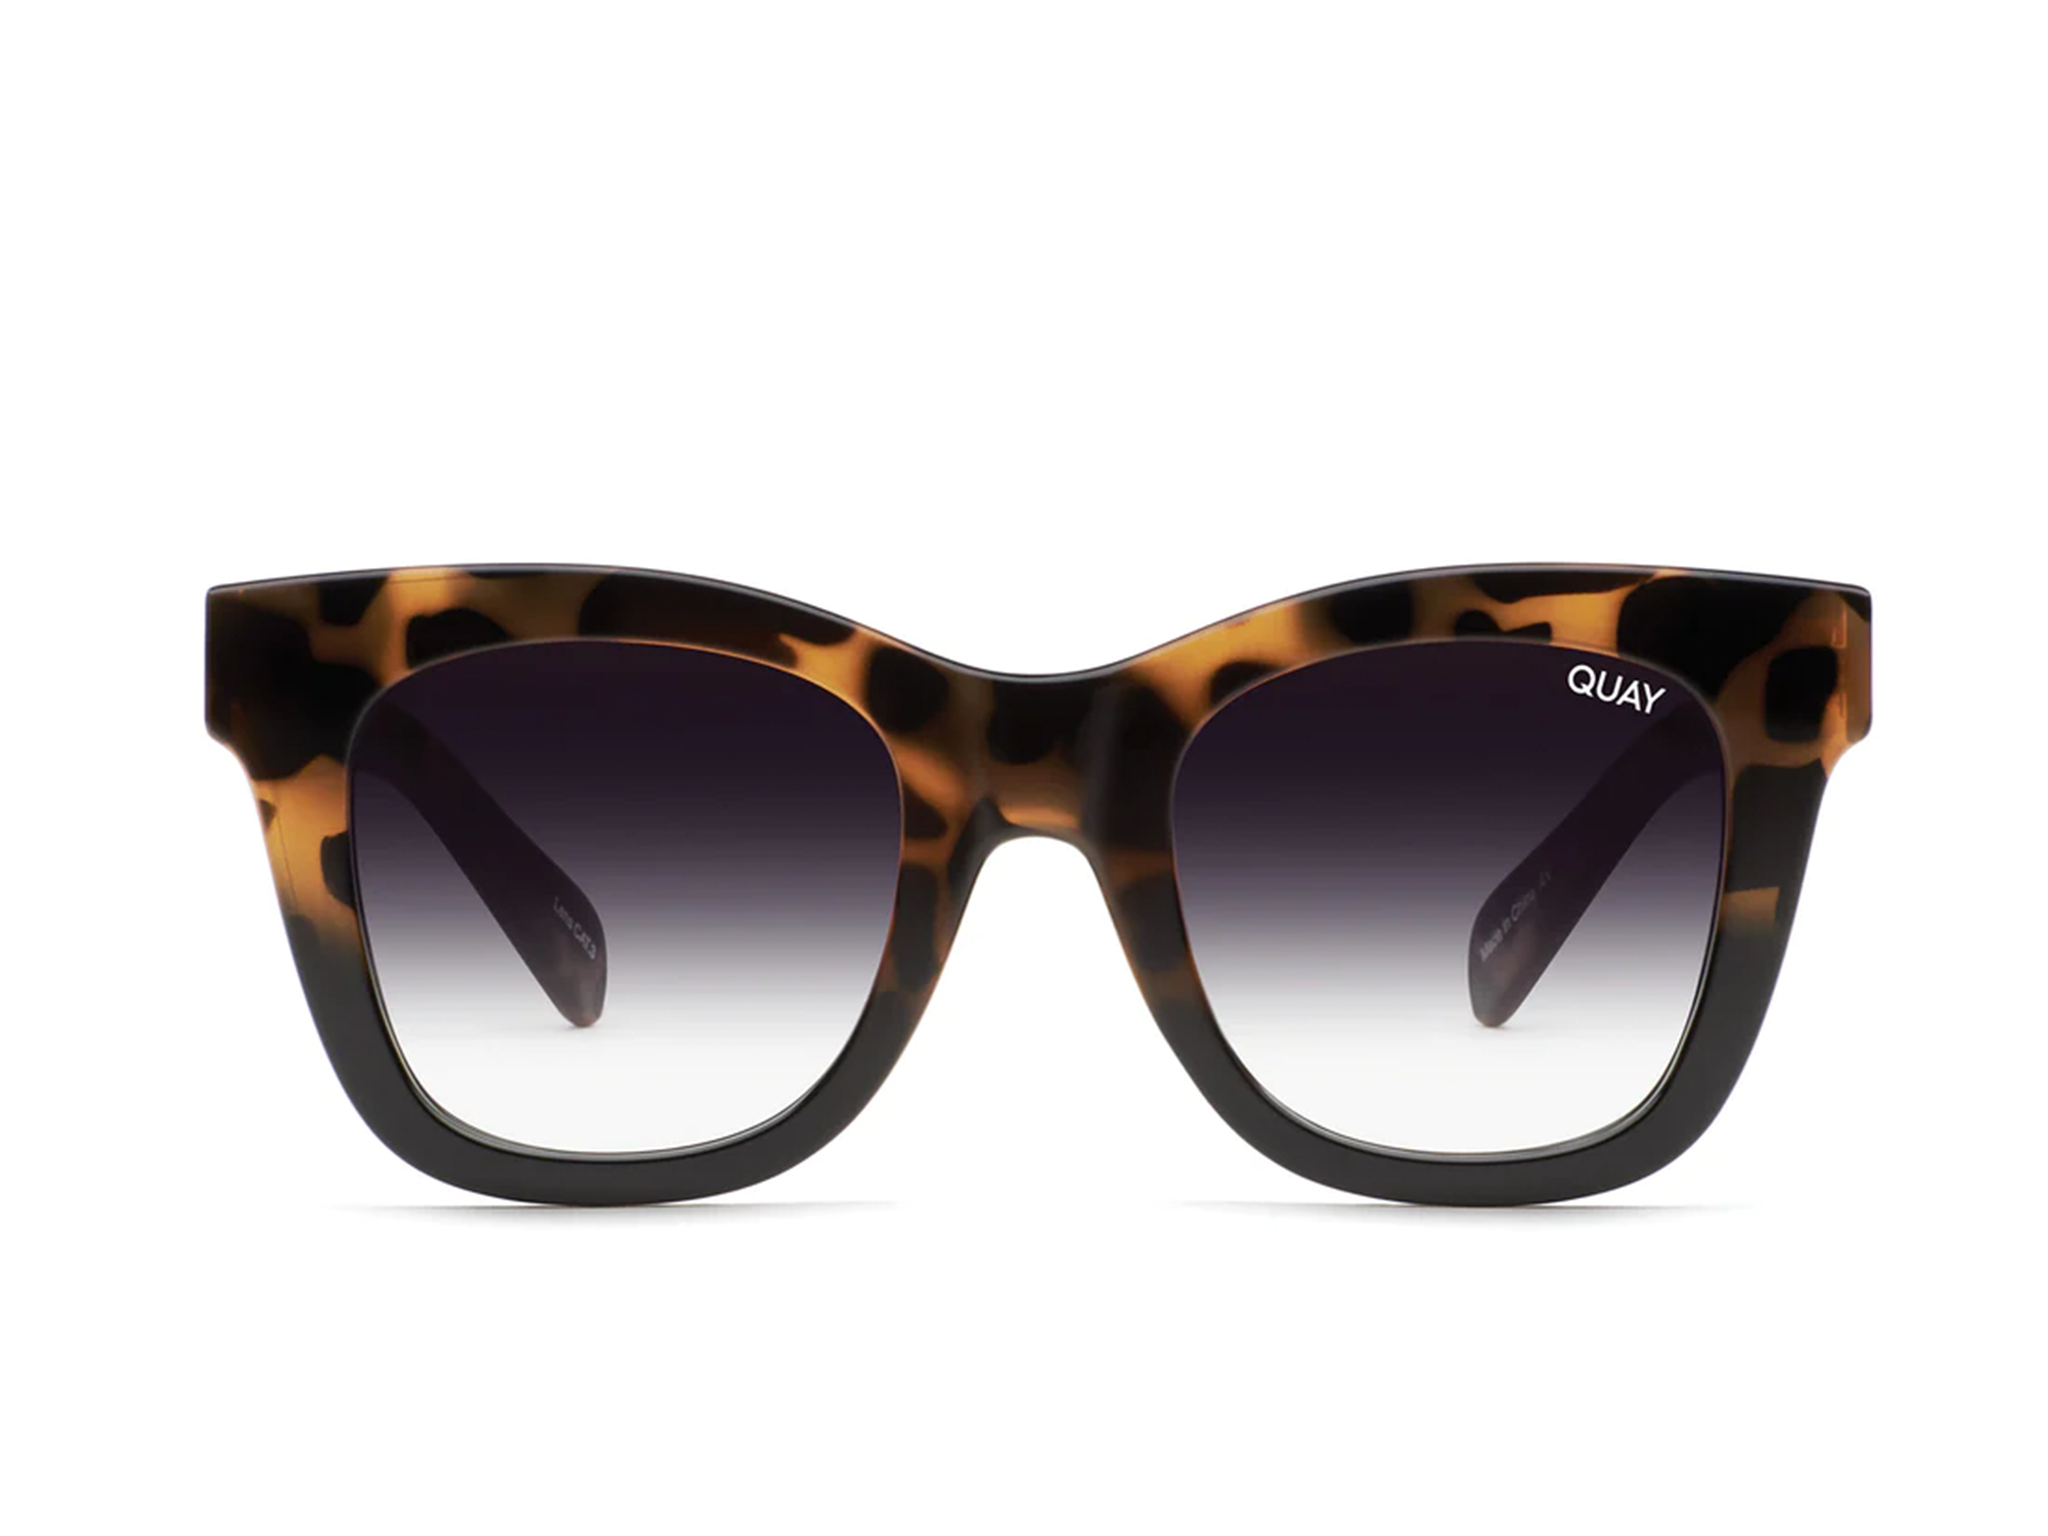 Quay sunglasses review: The Evasive and Base Line shades put to